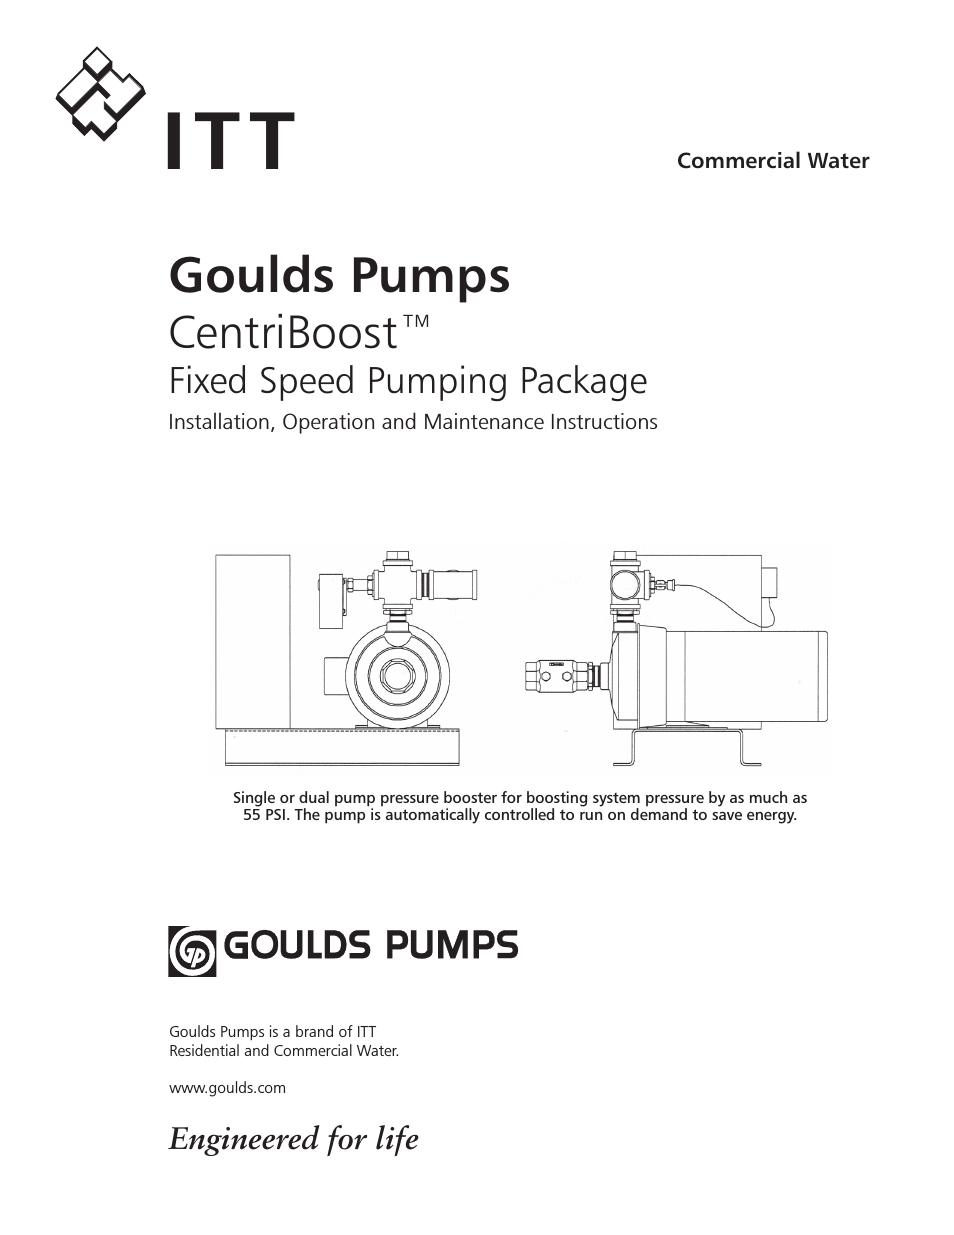 IM201 CentriBoost Fixed Speed Pumping Package